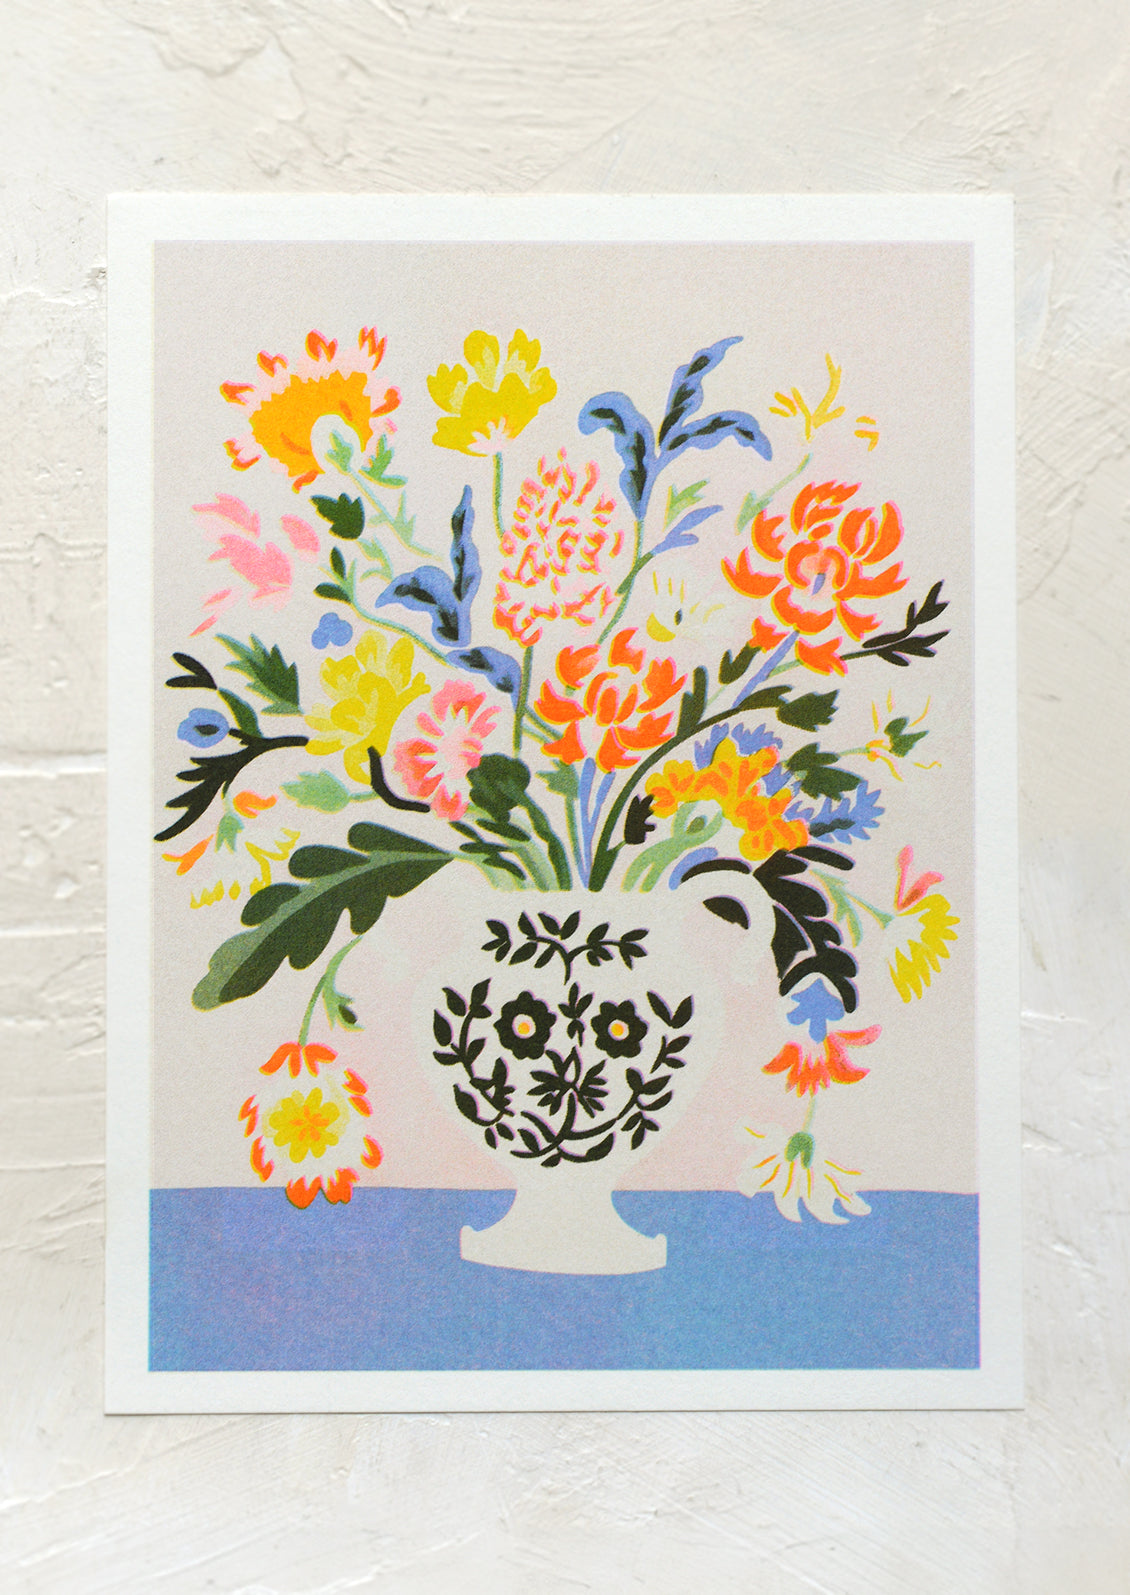 A risograph art print of colorful neon flowers in vase.